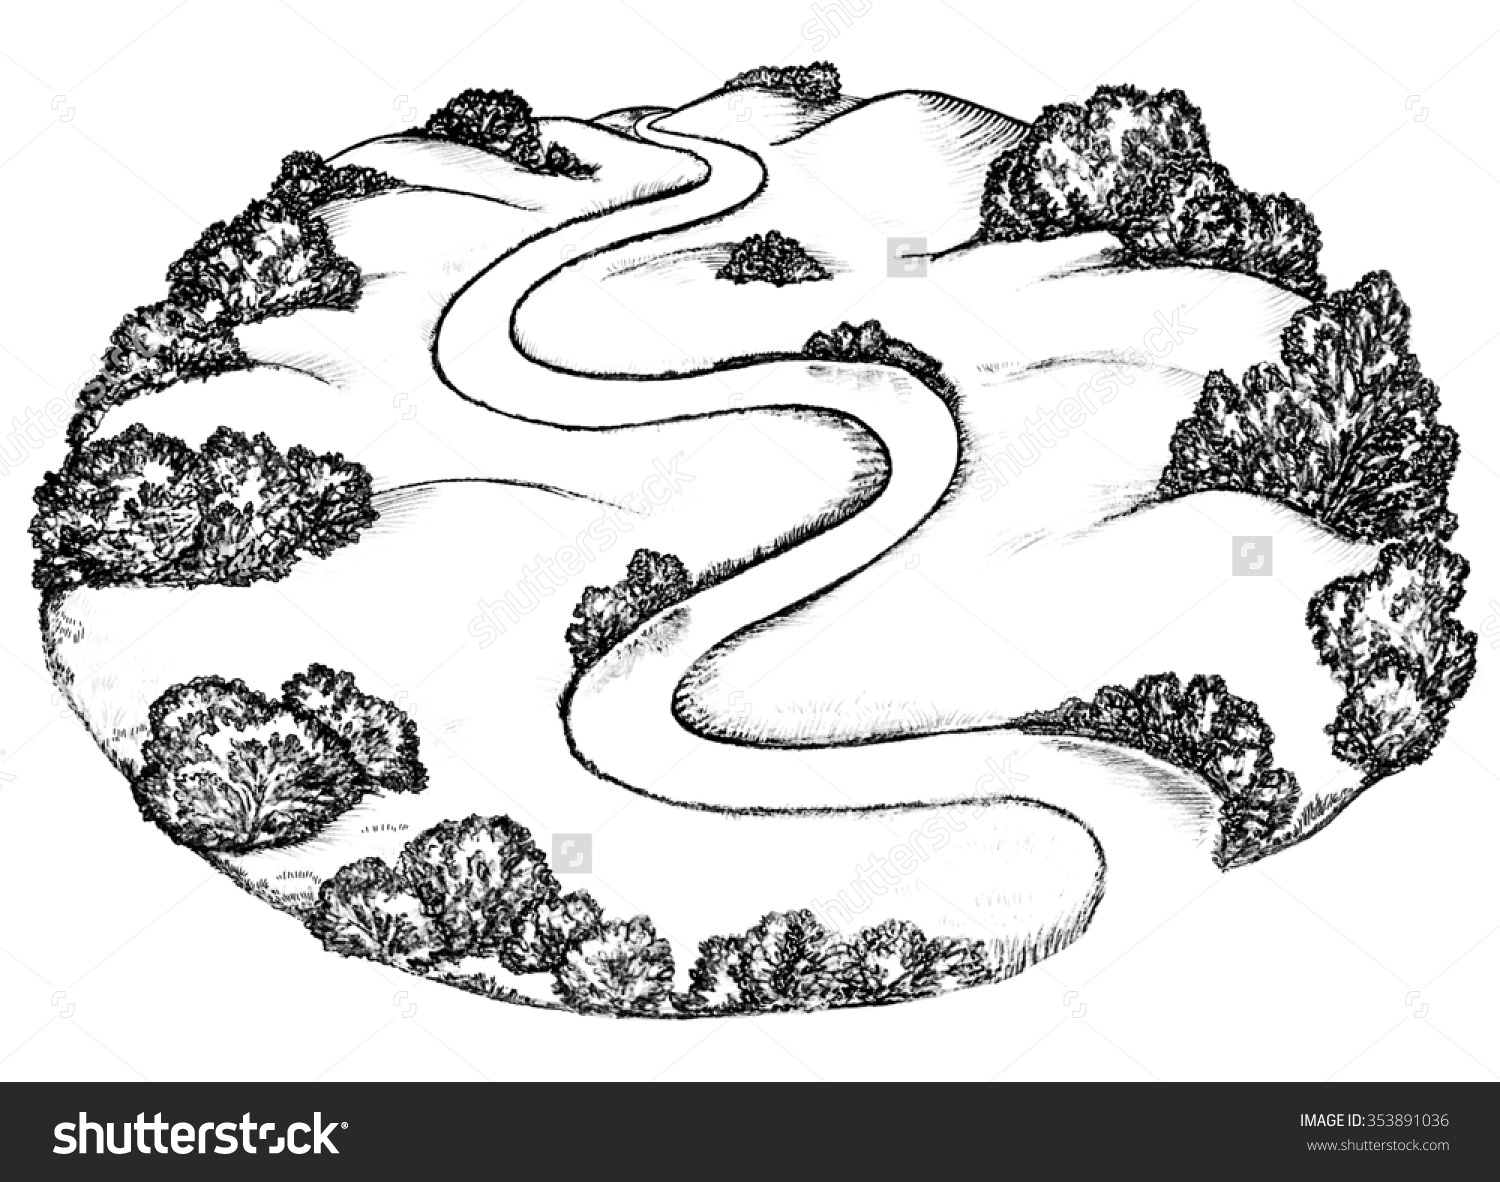 Save to a lightbox - River Clipart Black And White